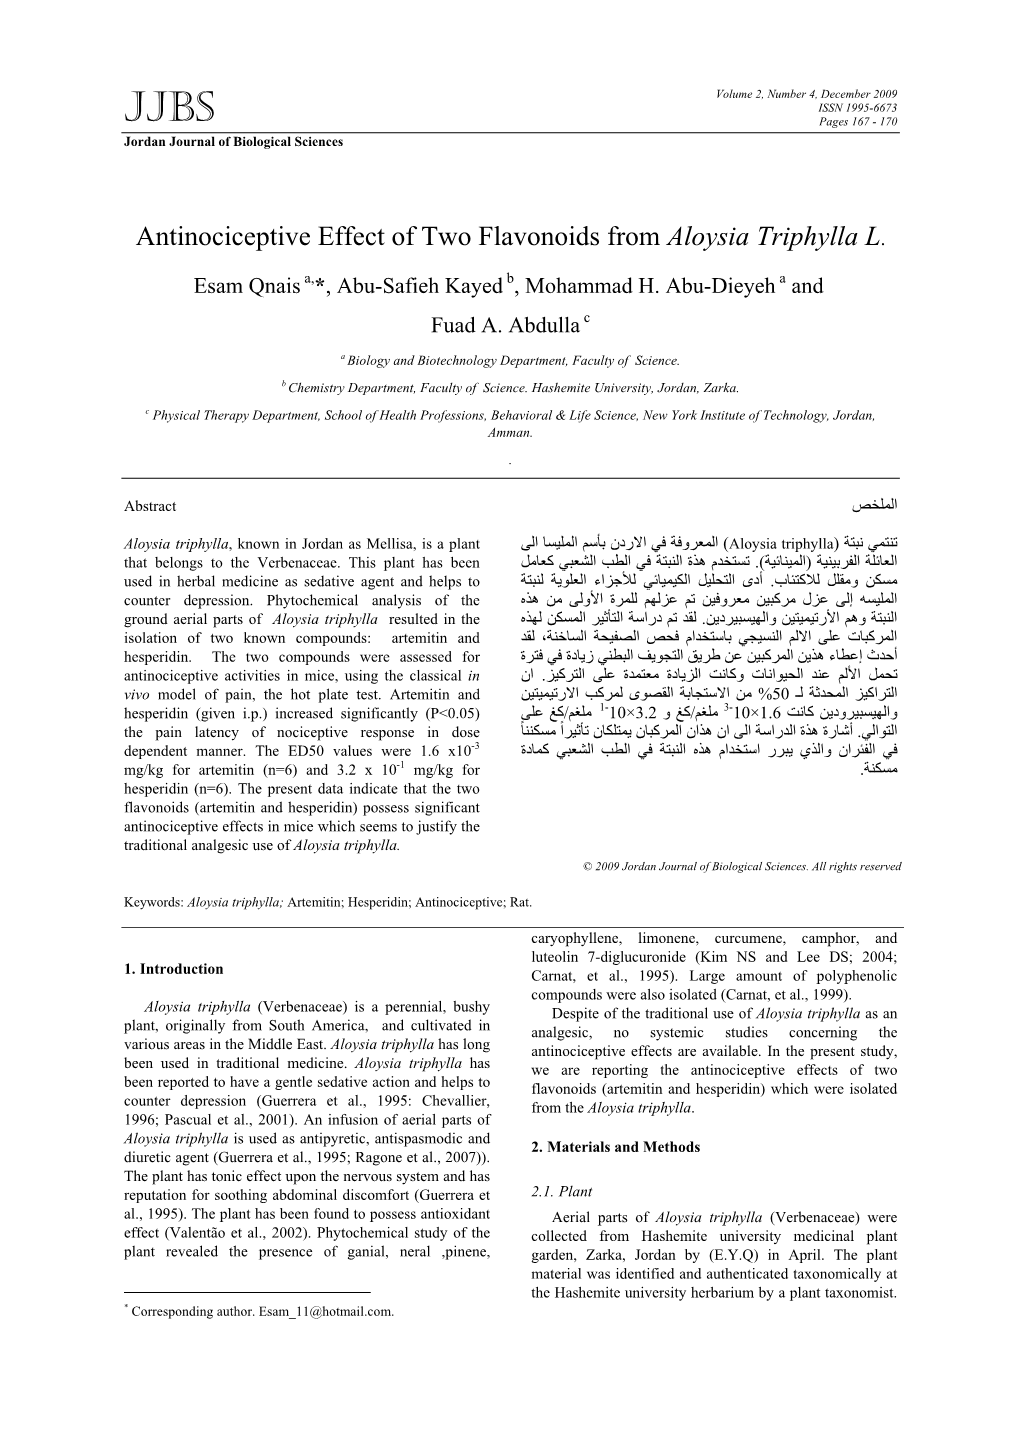 Antinociceptive Effect of Two Flavonoids from Aloysia Triphylla L